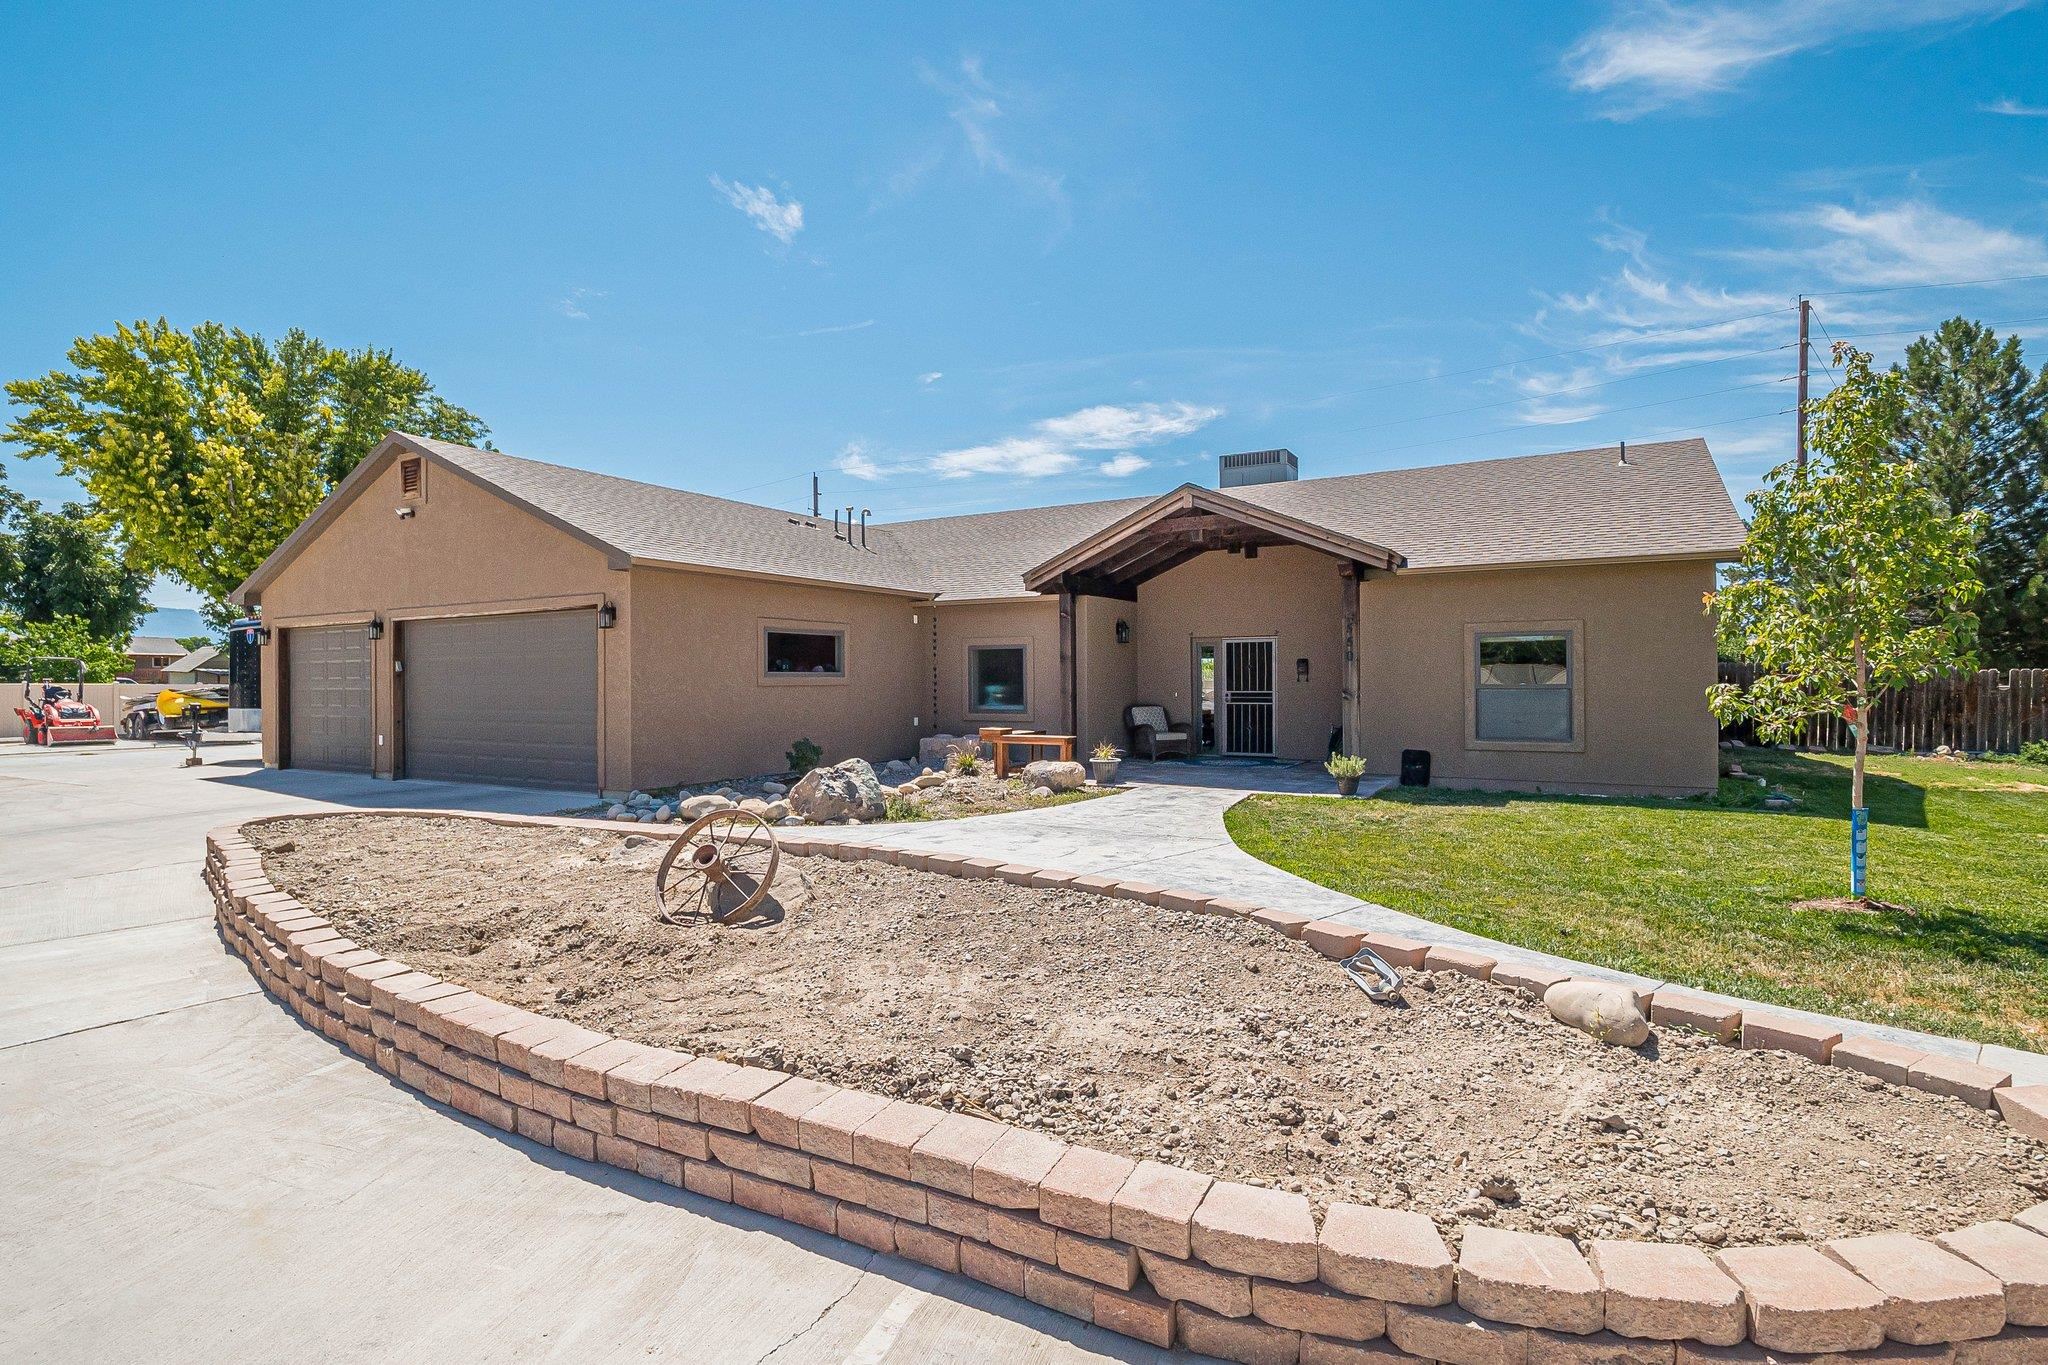 550 30 Road, Grand Junction, CO 